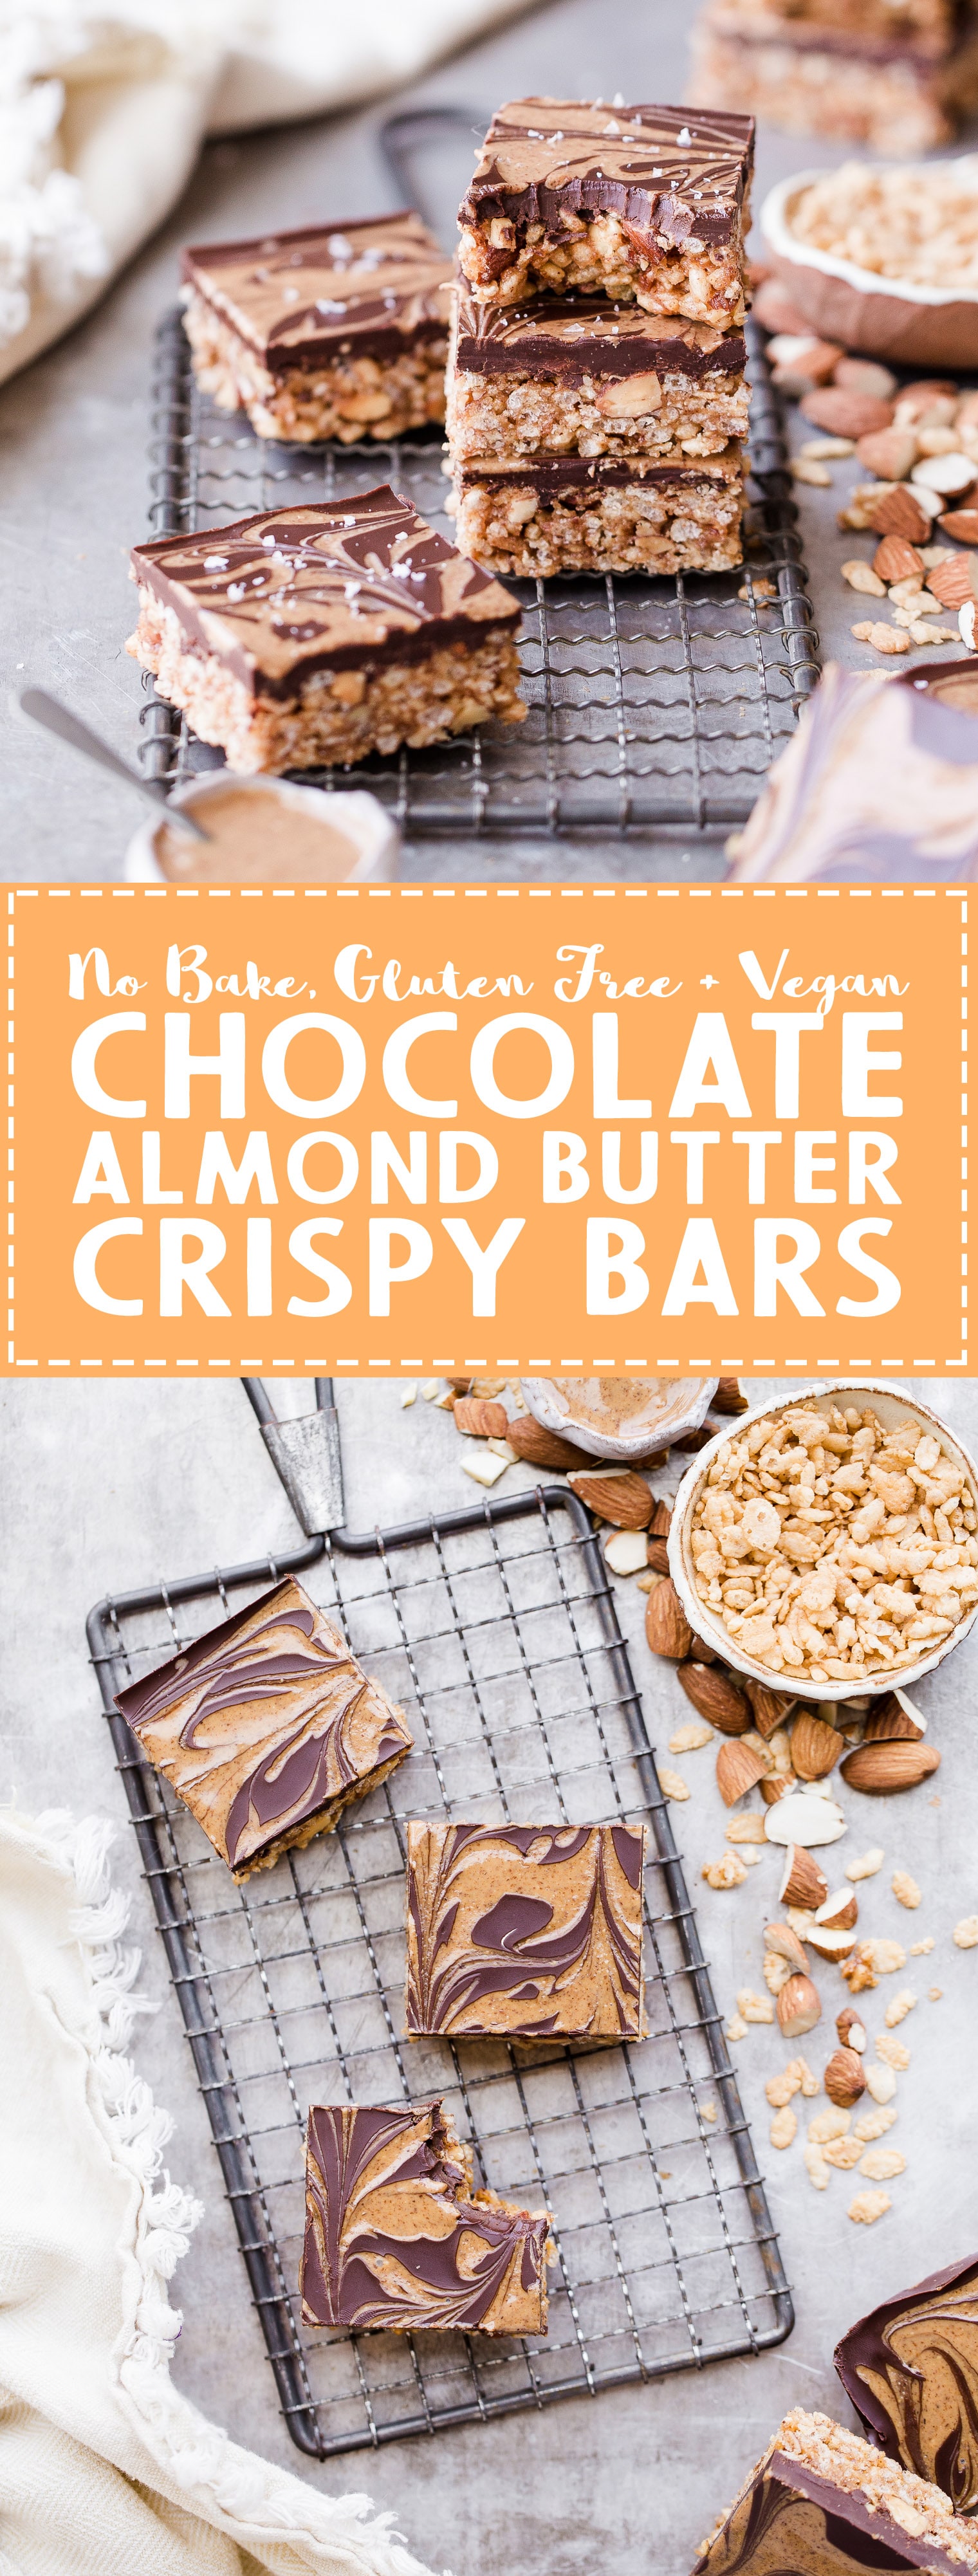 These Chocolate Almond Butter Crispy Bars are crunchy, rich, and absolutely delicious! There is no baking necessary so they're super quick and simple to make with only 7 ingredients.